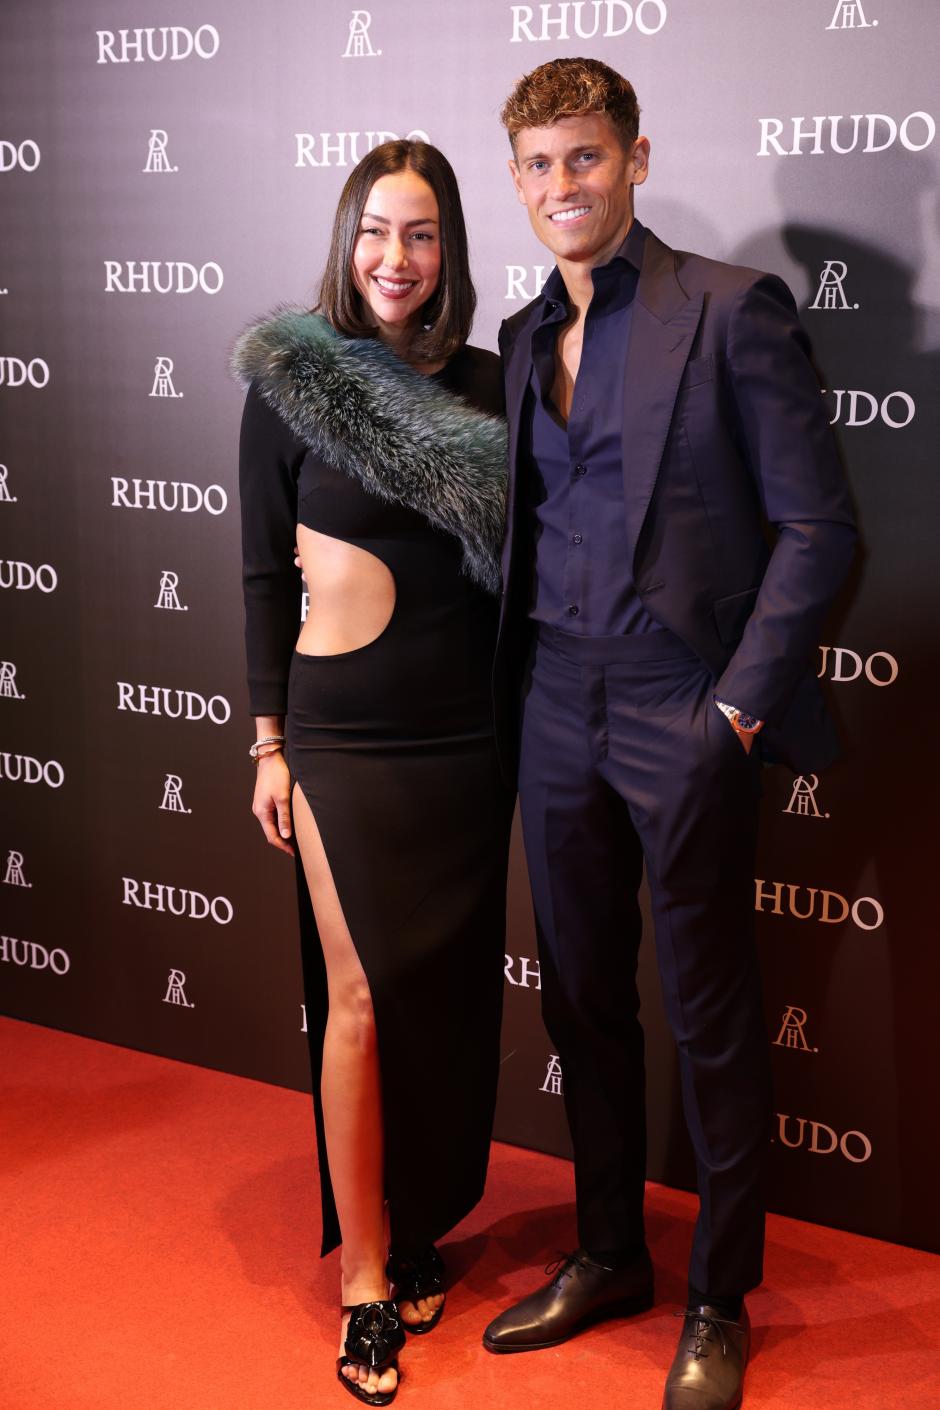 Soccerplayer Marcos Llorente and Patricia Noarbe at photocall for presentation of Rhudo in Madrid on Monday, 29 January 2024.